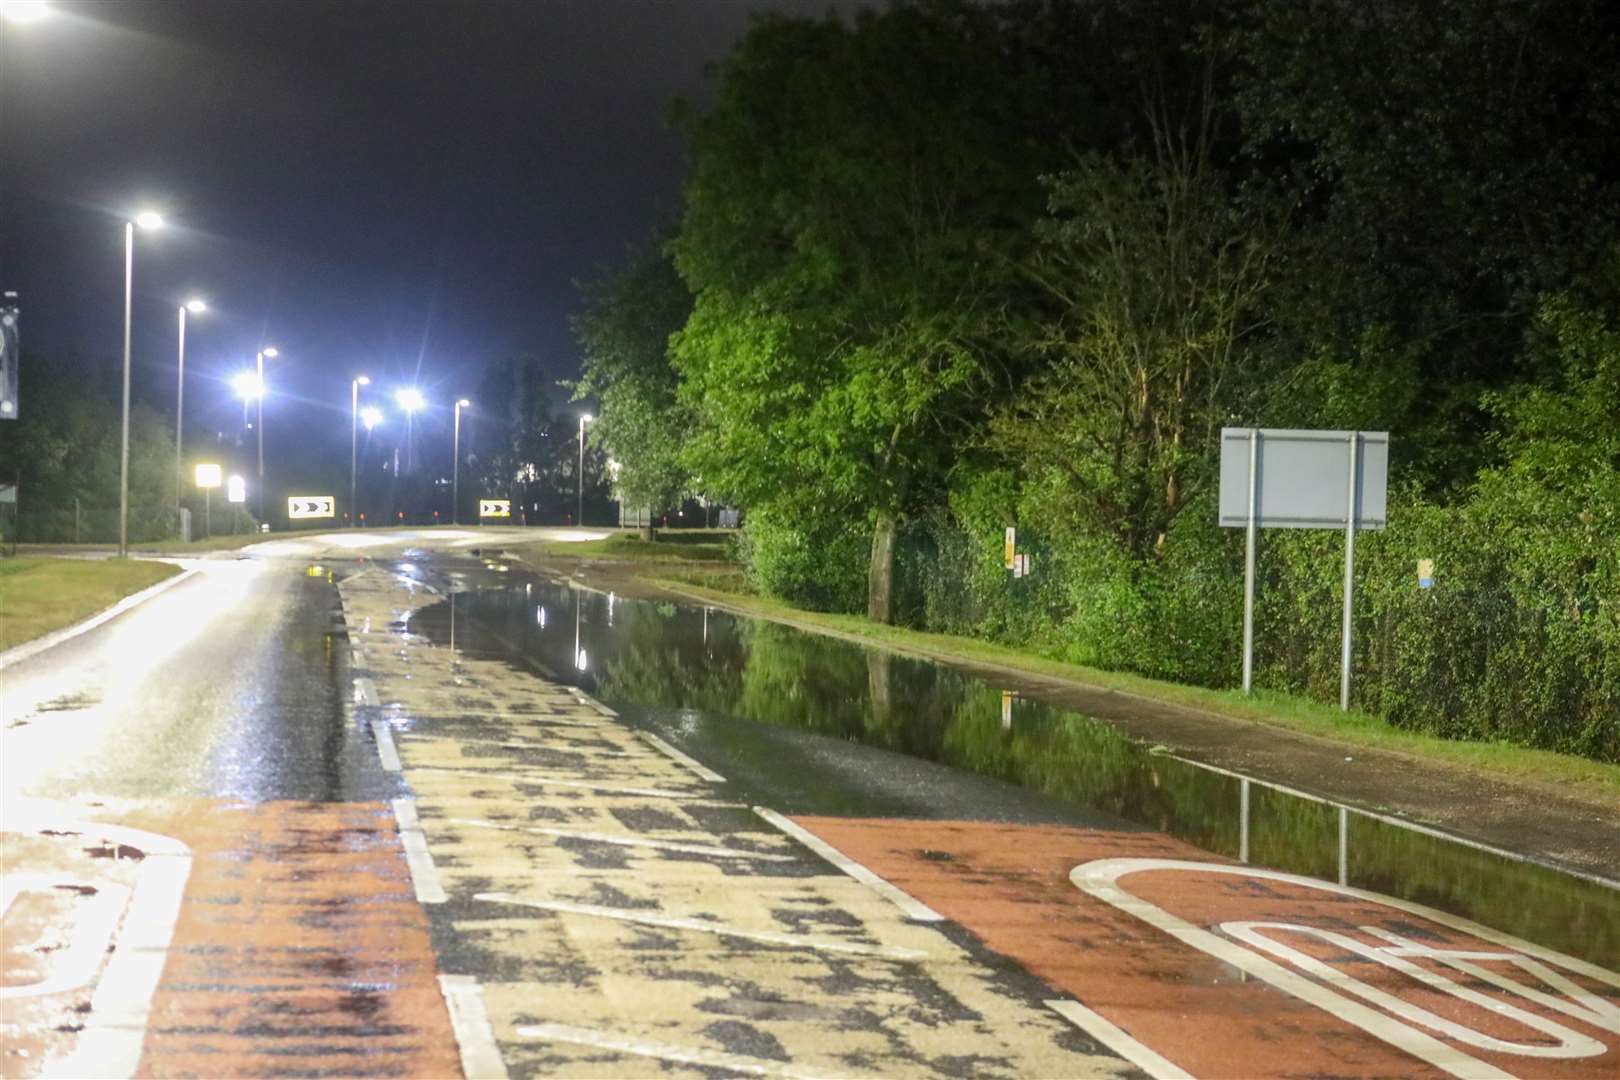 Water has pooled on surrounding roads from heavy rains.  Photo: UKNIP